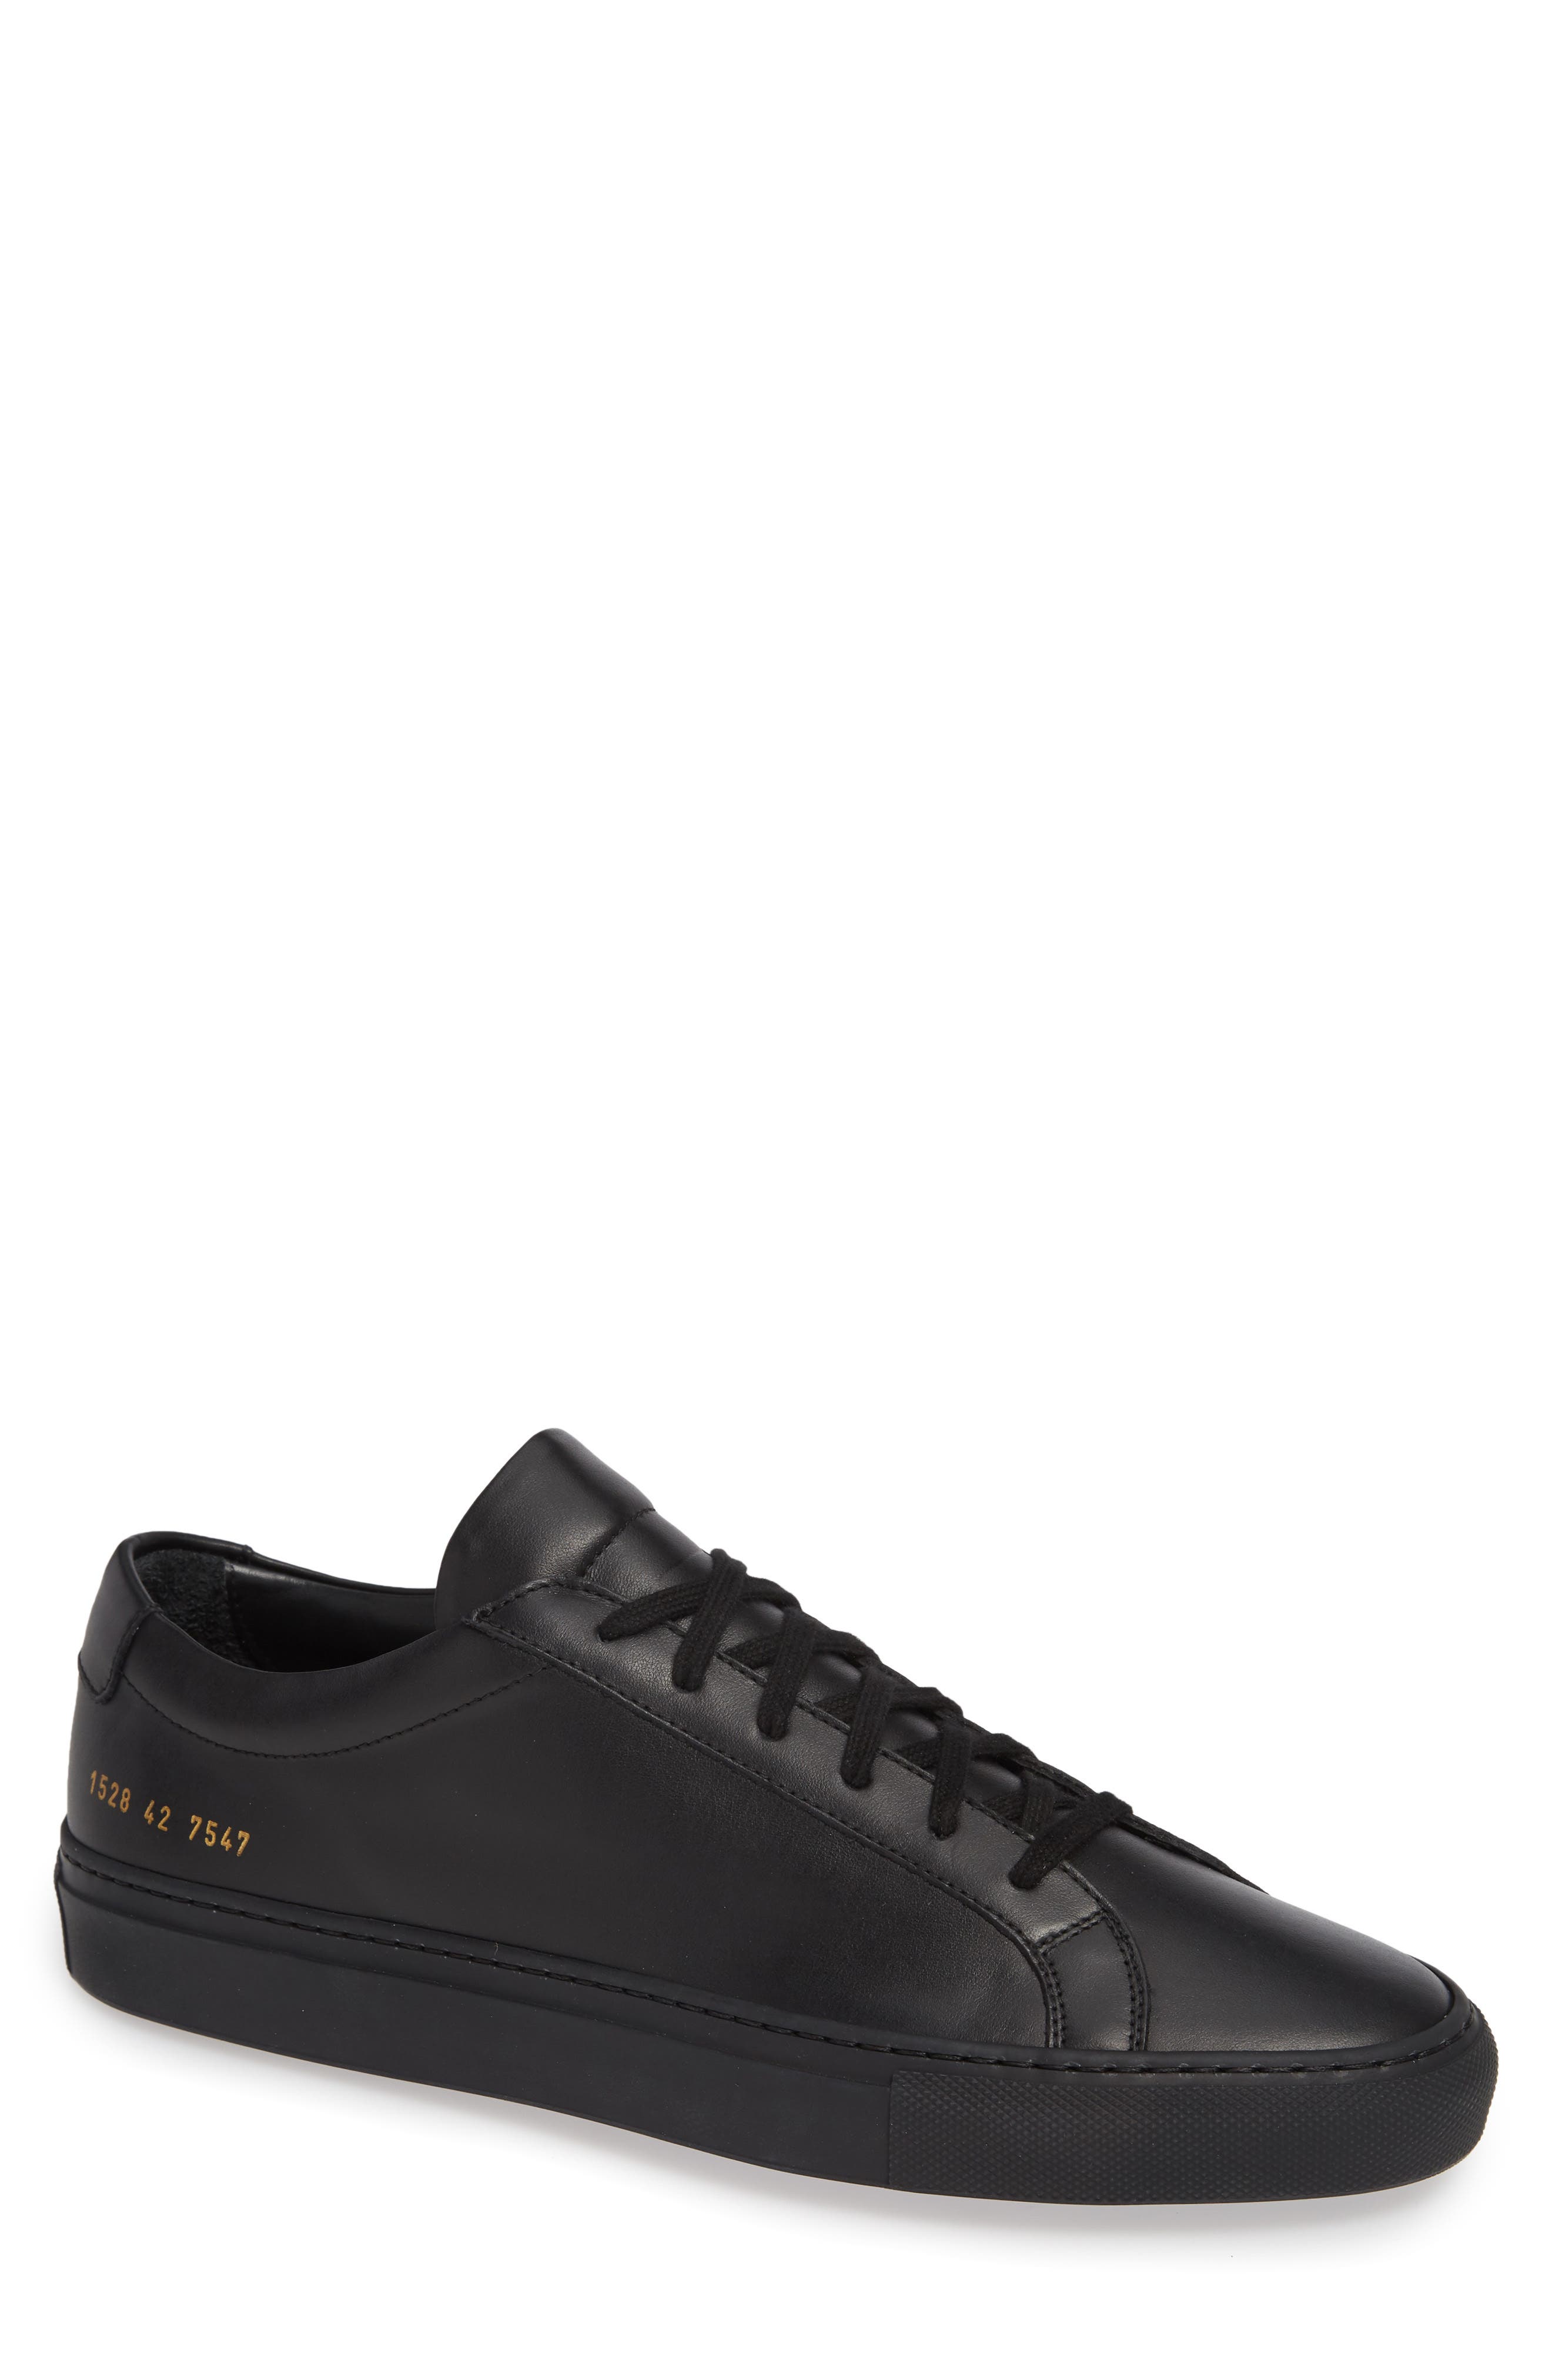 Common Projects | Nordstrom